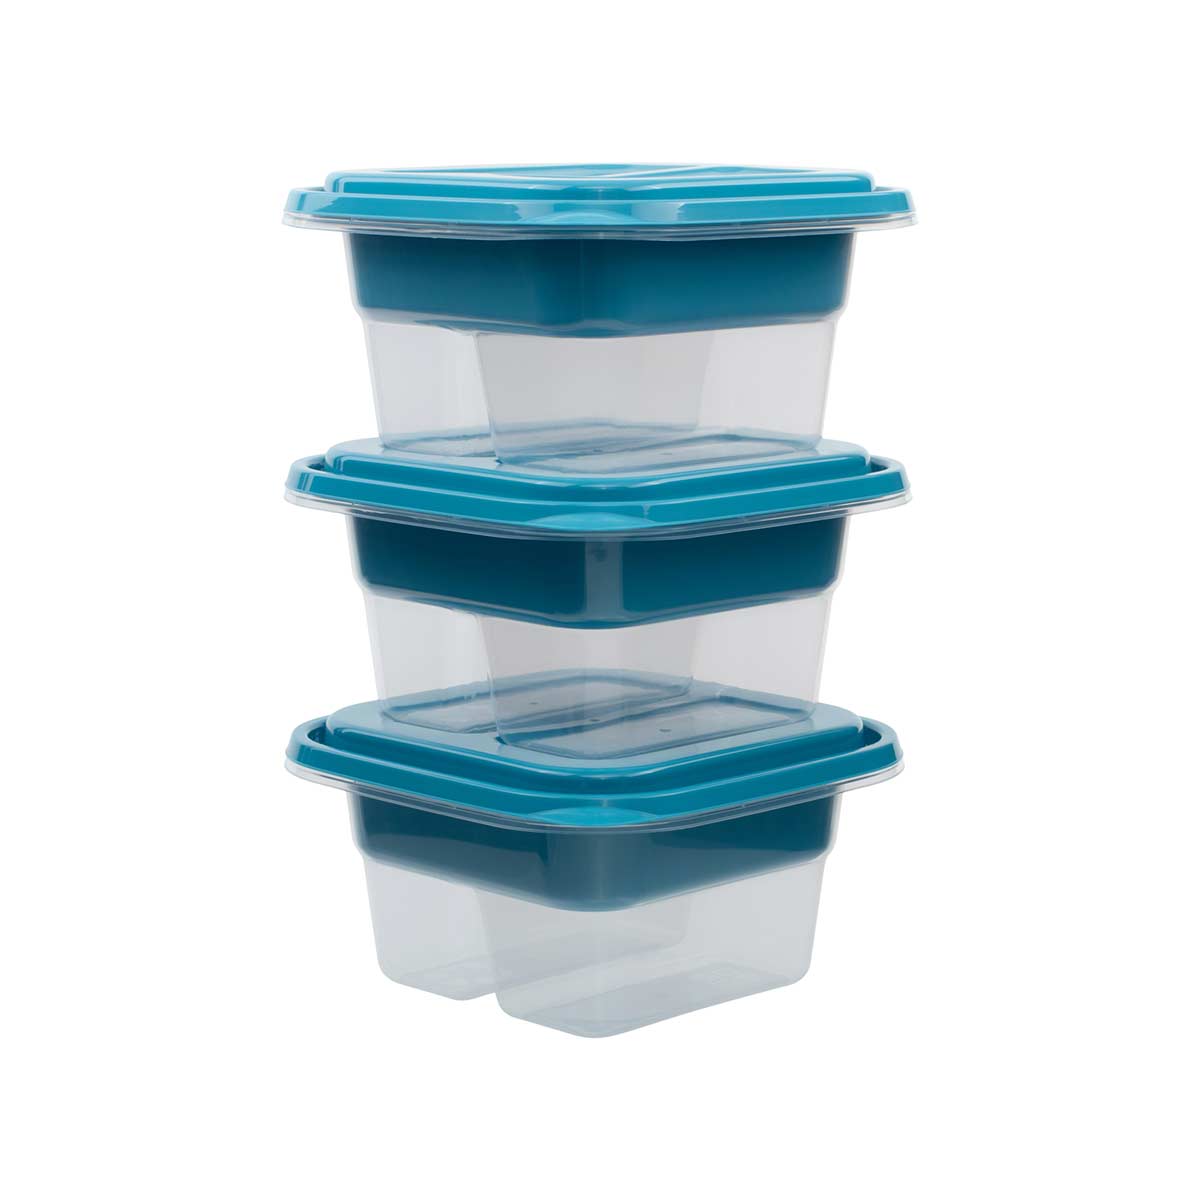 https://www.goodcook.com/media/catalog/product/g/o/goodcook-everyware-lunch-cube-food-storage-container-001.jpg?auto=webp&format=pjpg